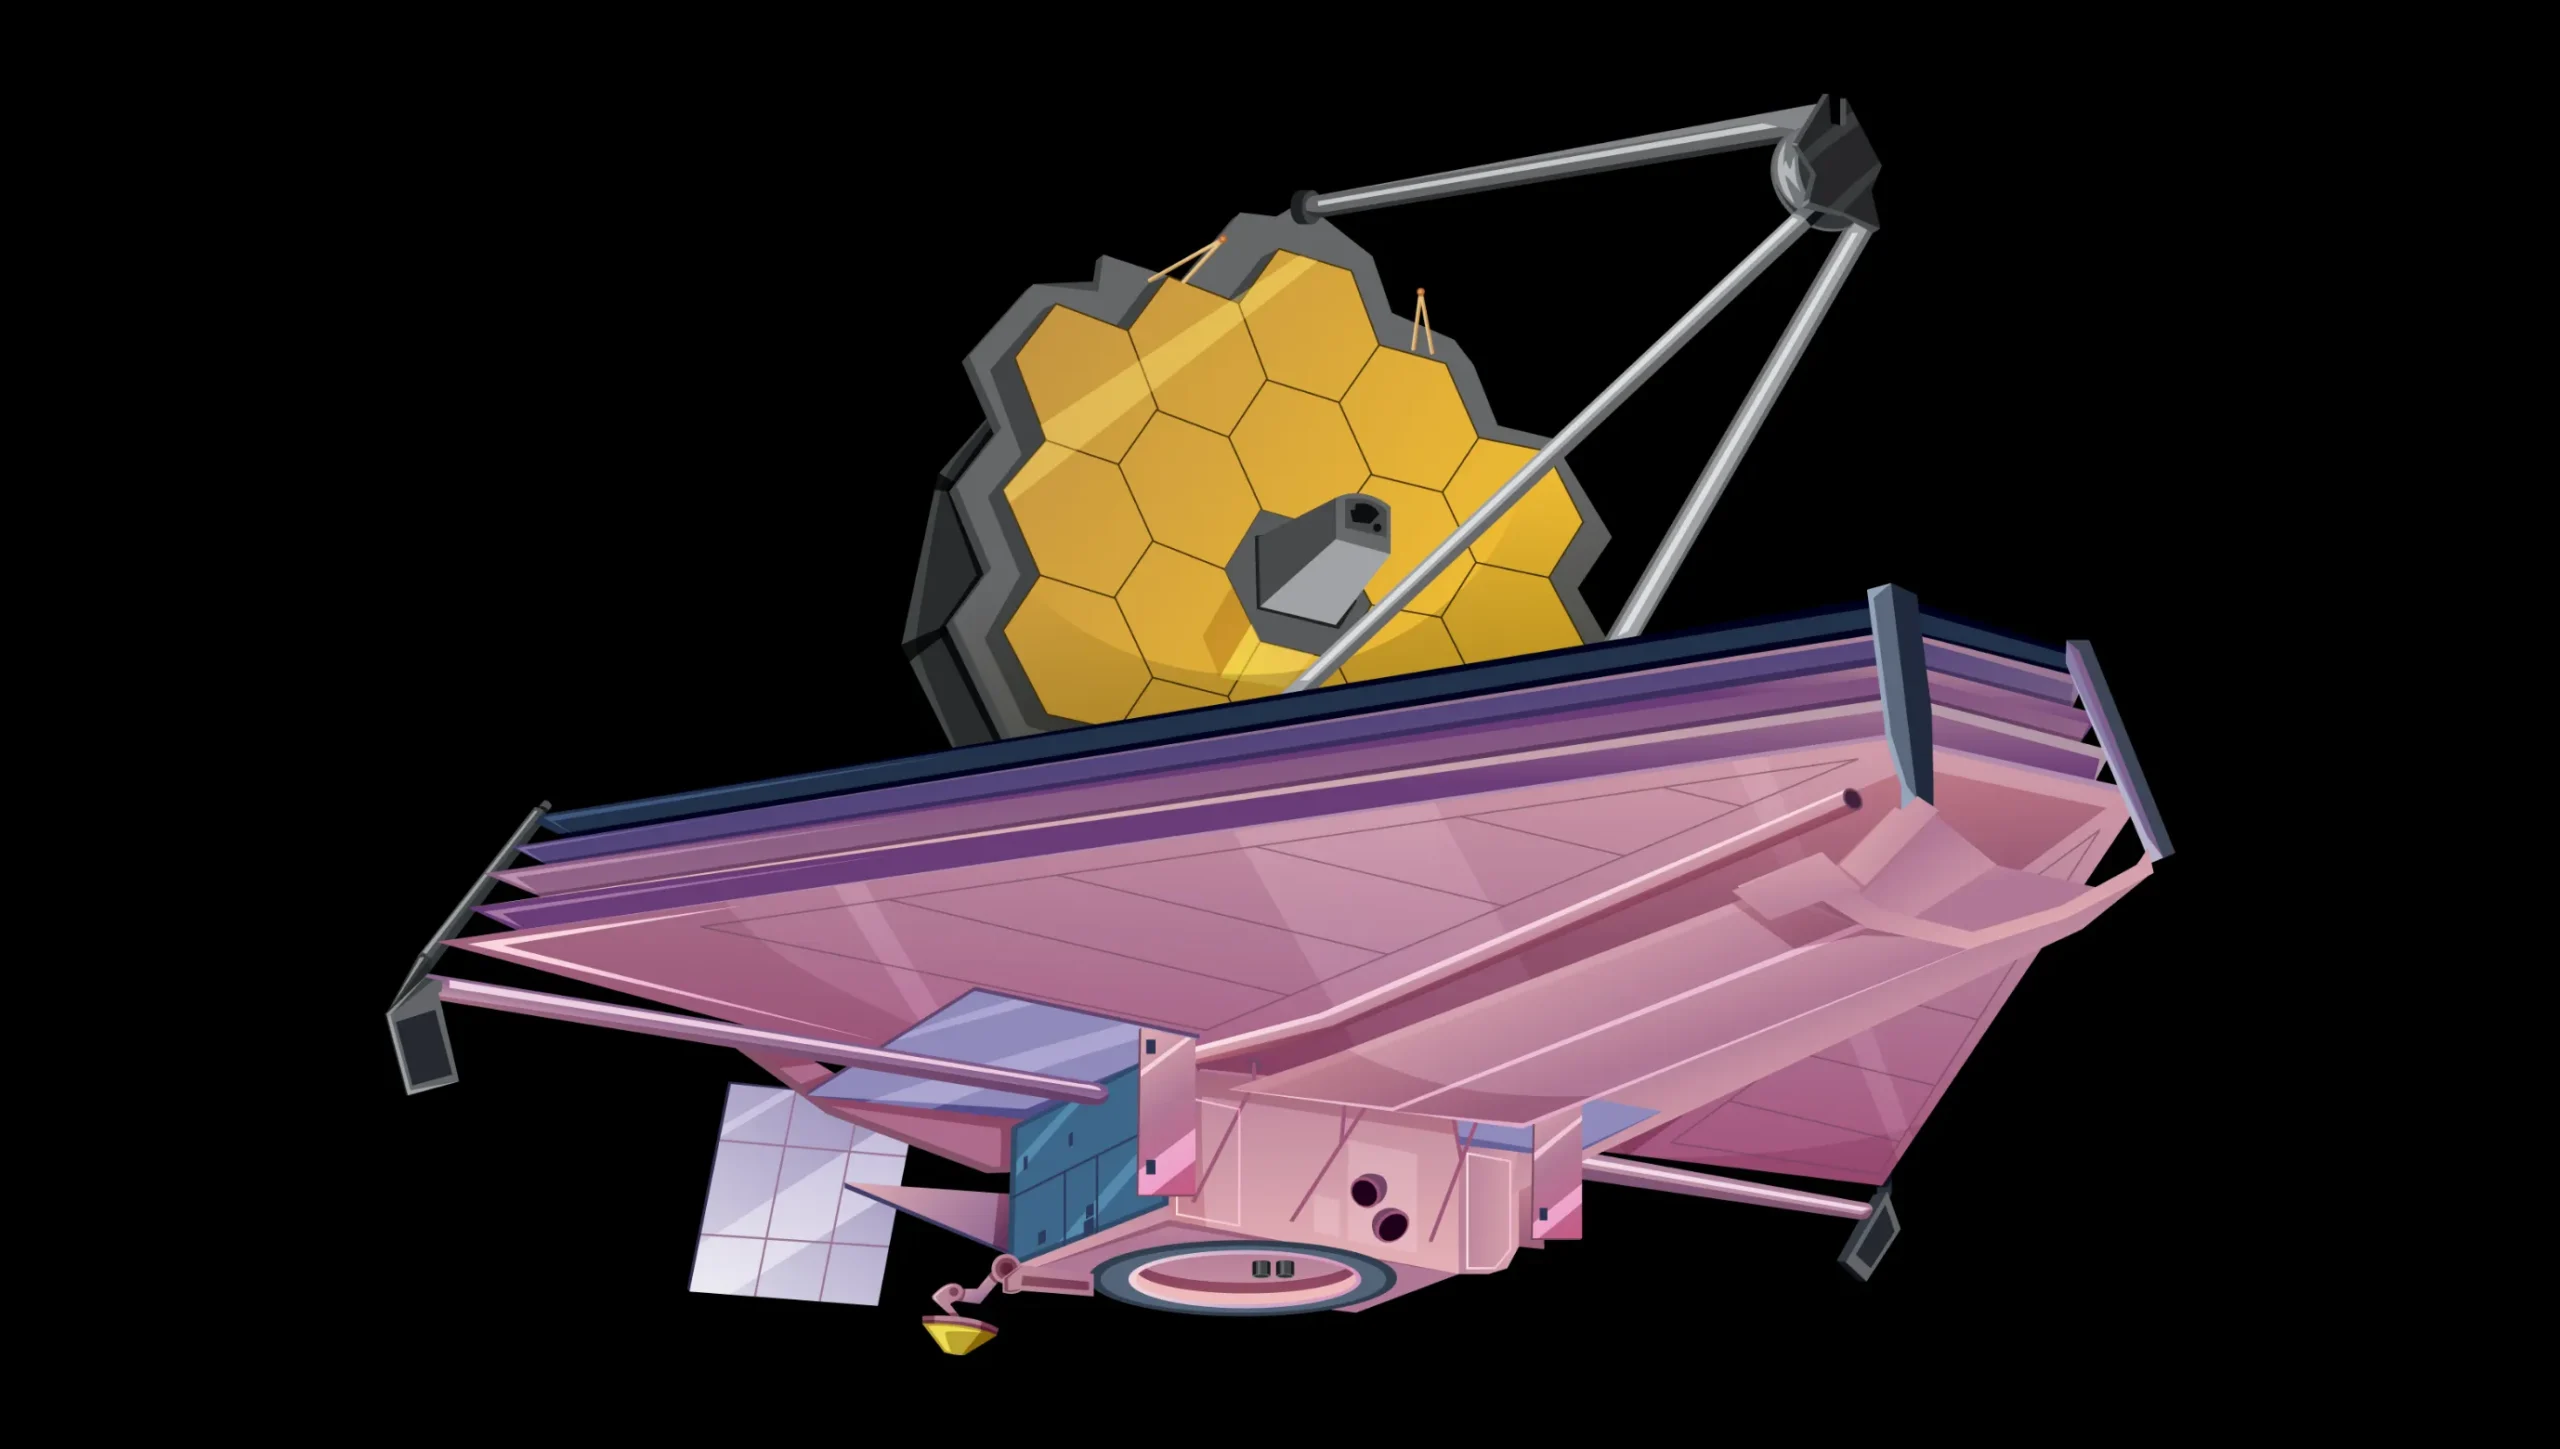 The JWST, a telescope orbiting Jupiter, is expected to operate for years, capturing stunning images of the universe.